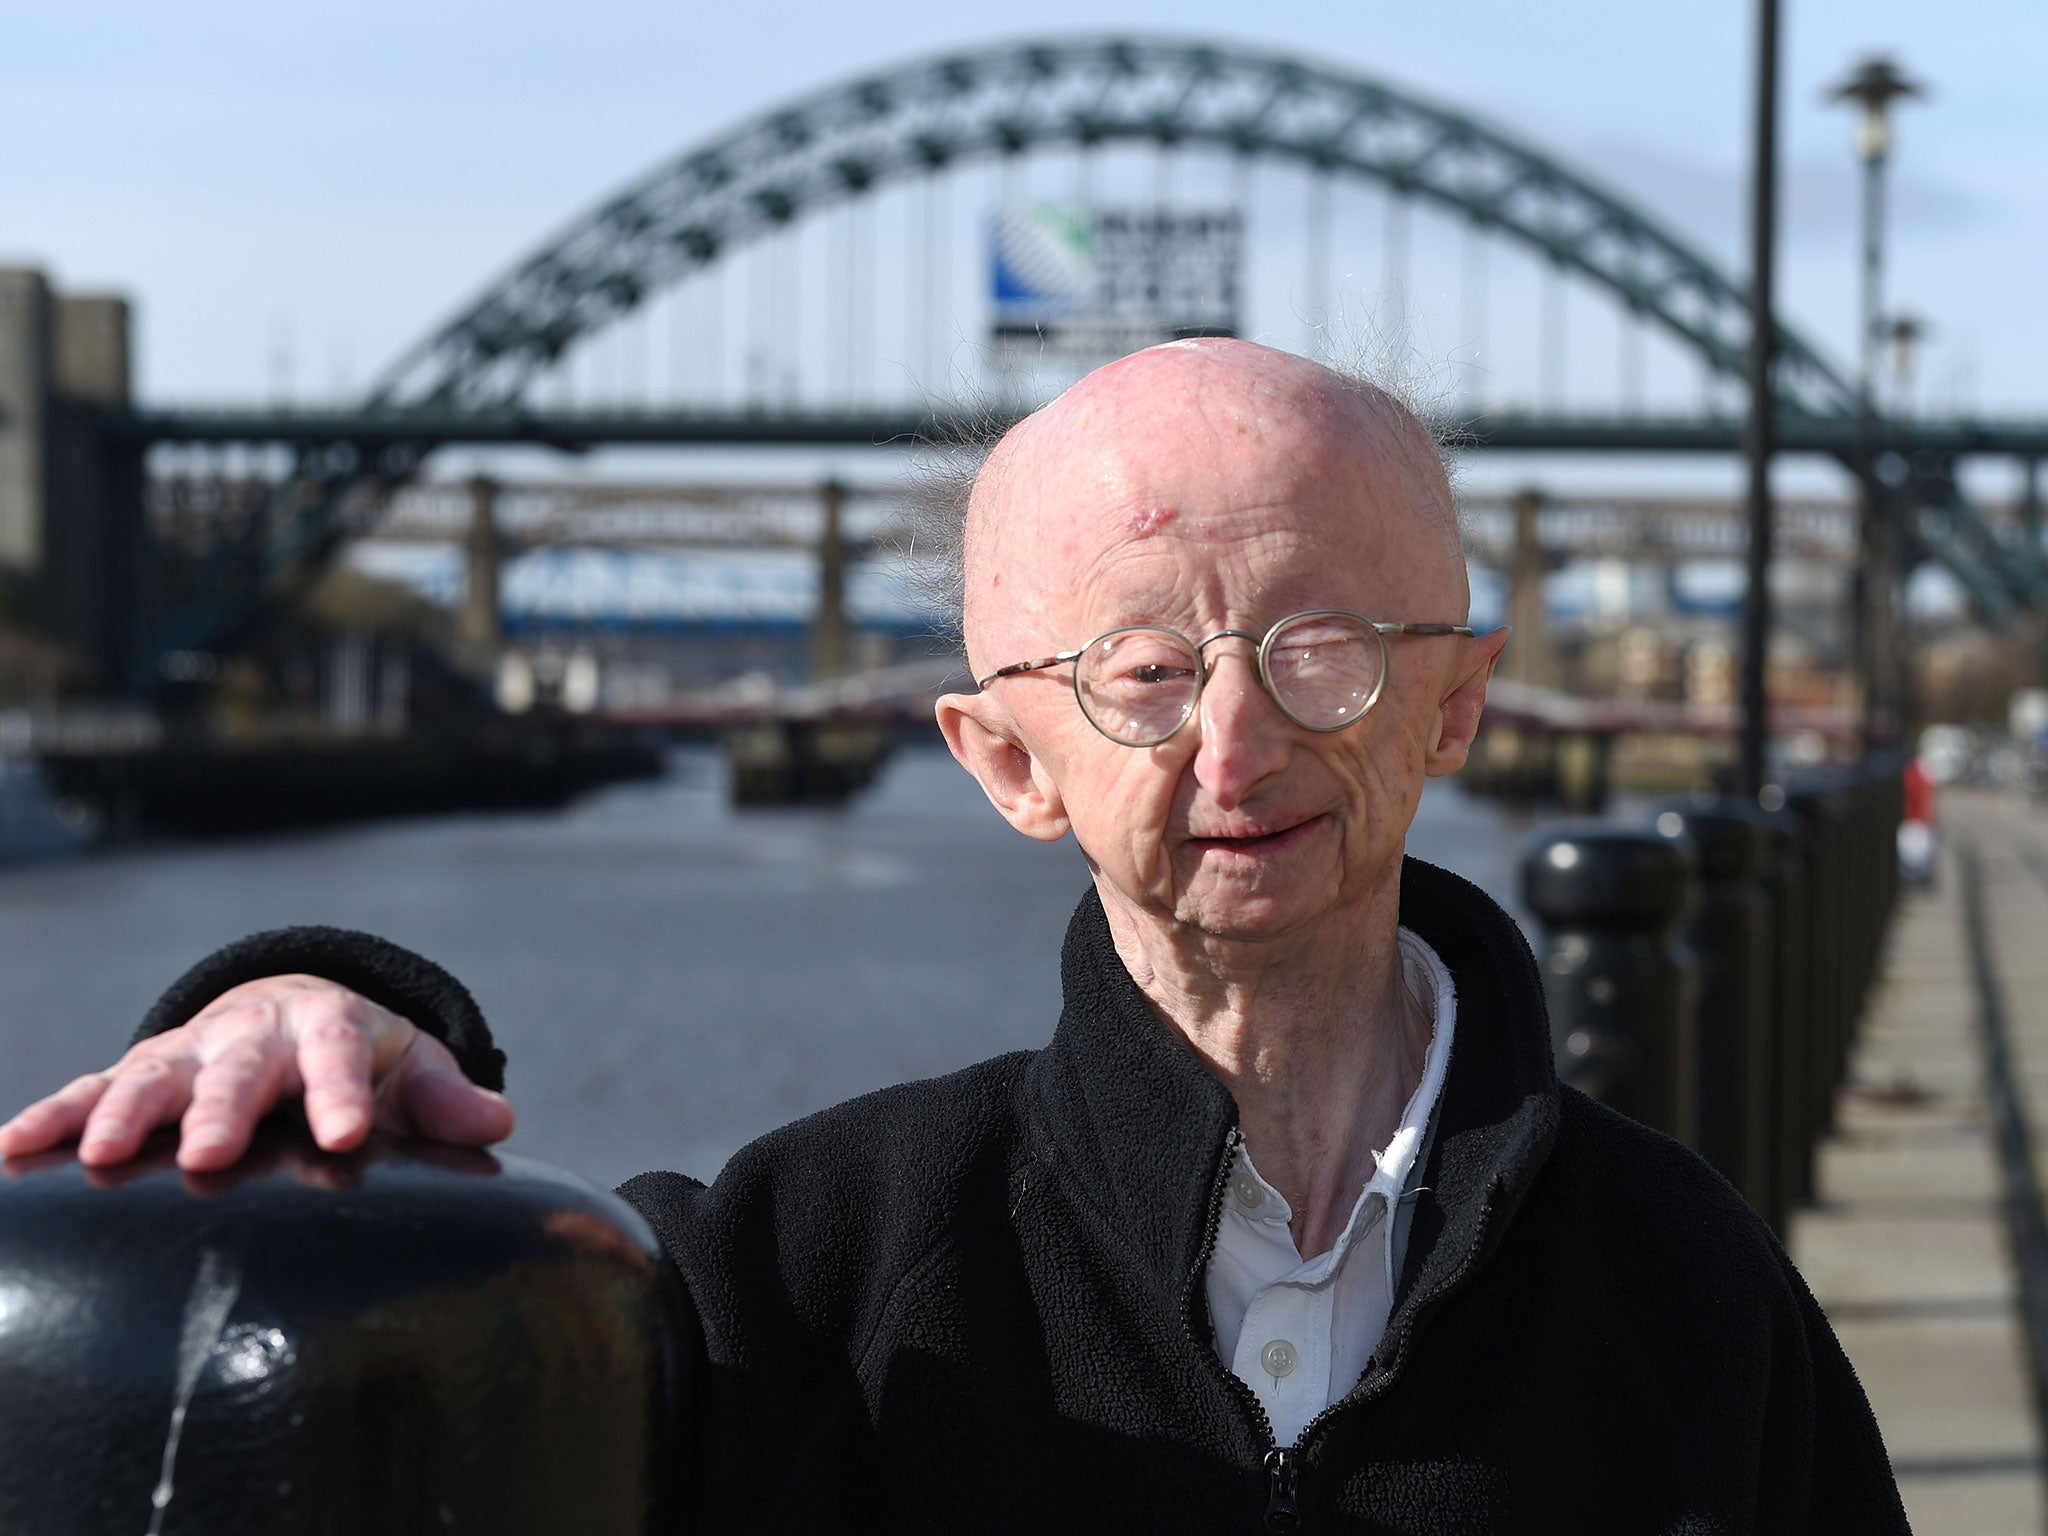 Alan Barnes said he feels safe after moving from the house where he was mugged